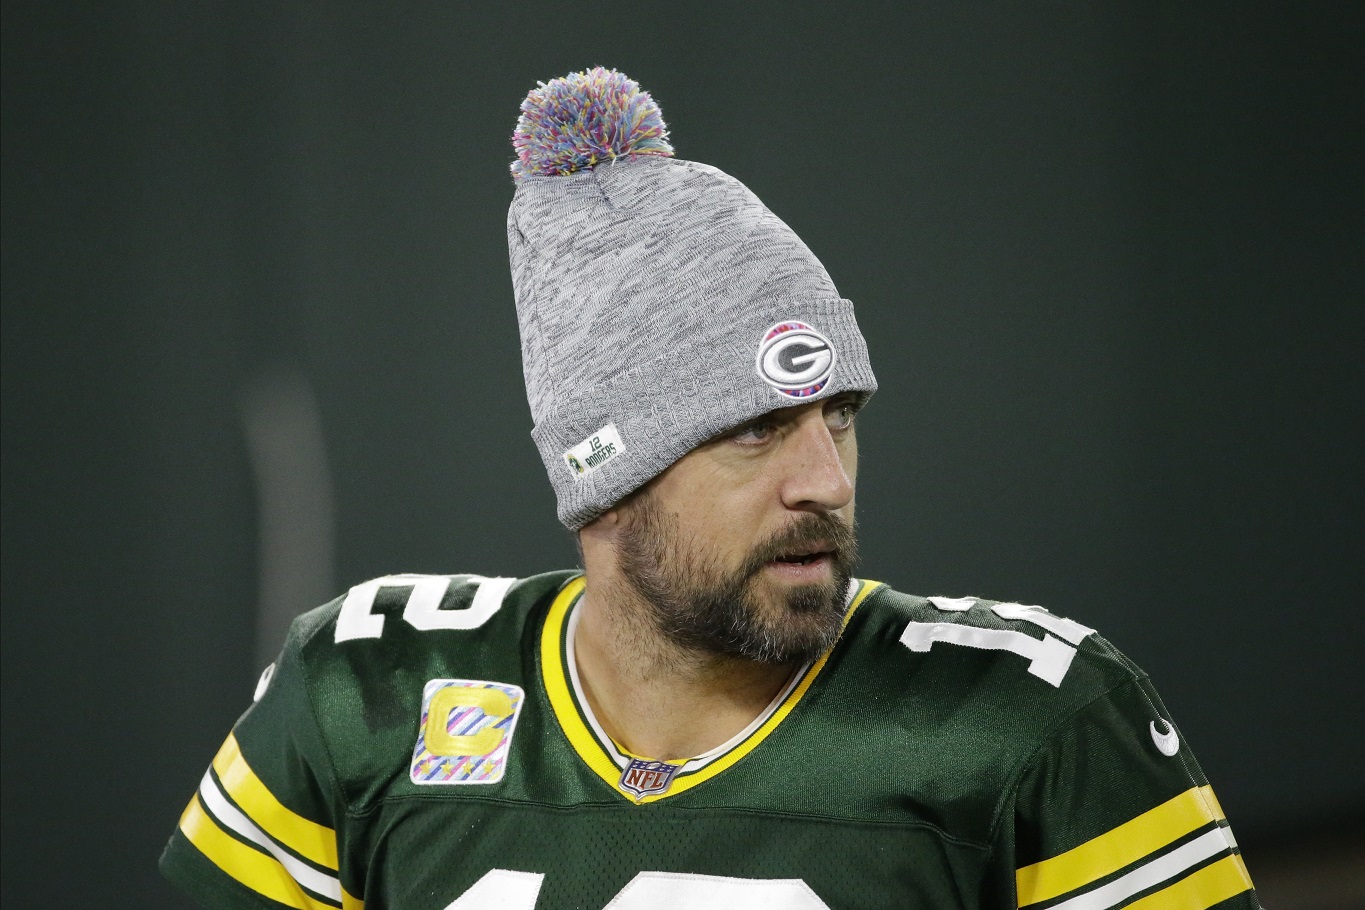 Rodgers feeling strong as surging Packers head into playoffs